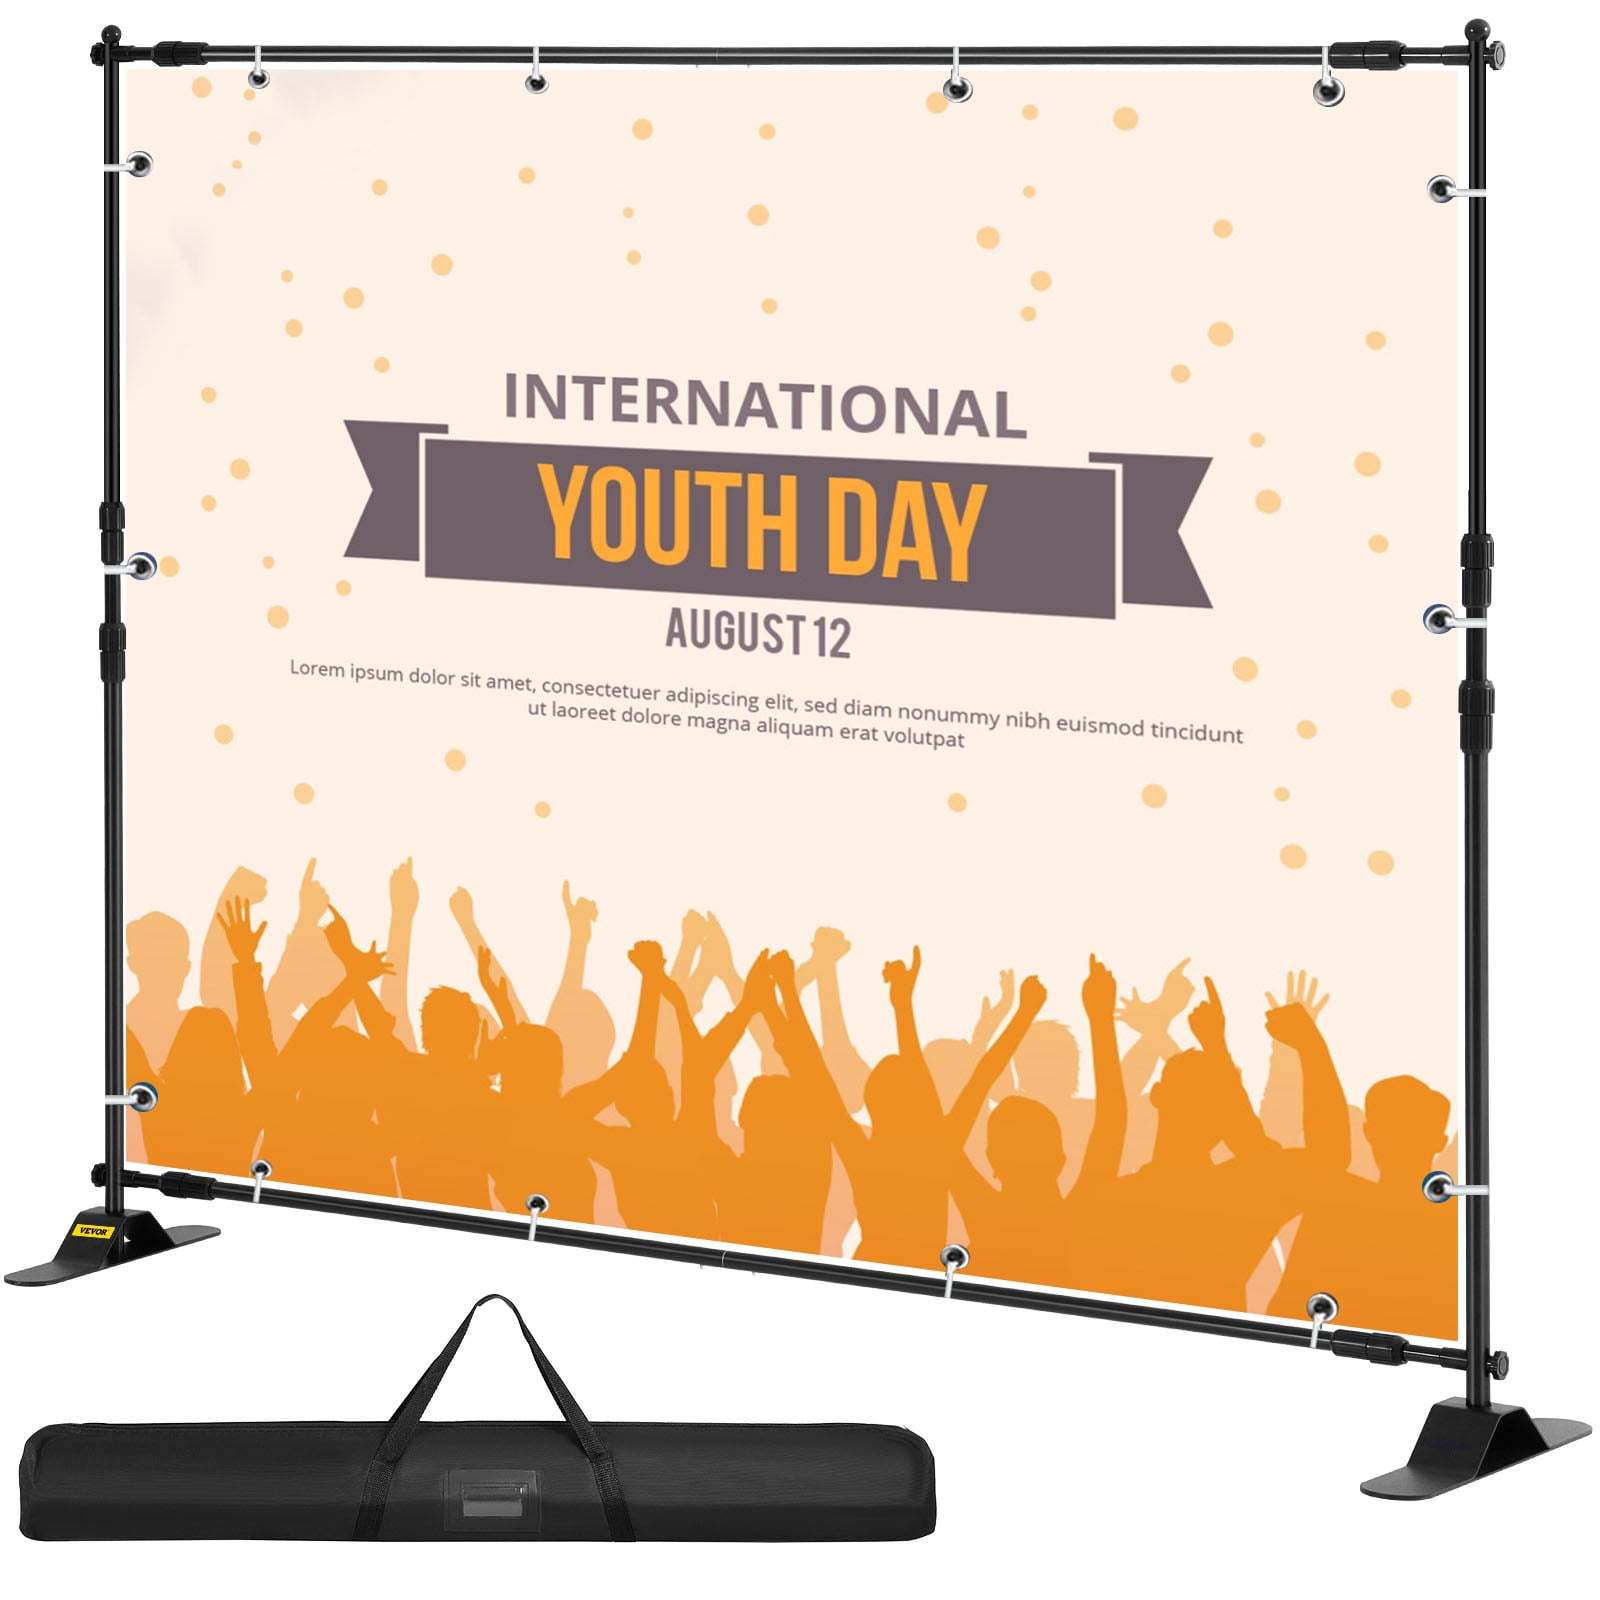 8*8 ft Pop Up Backdrop Frame Display Trade Show Backdrop Wall Stand High-end US 